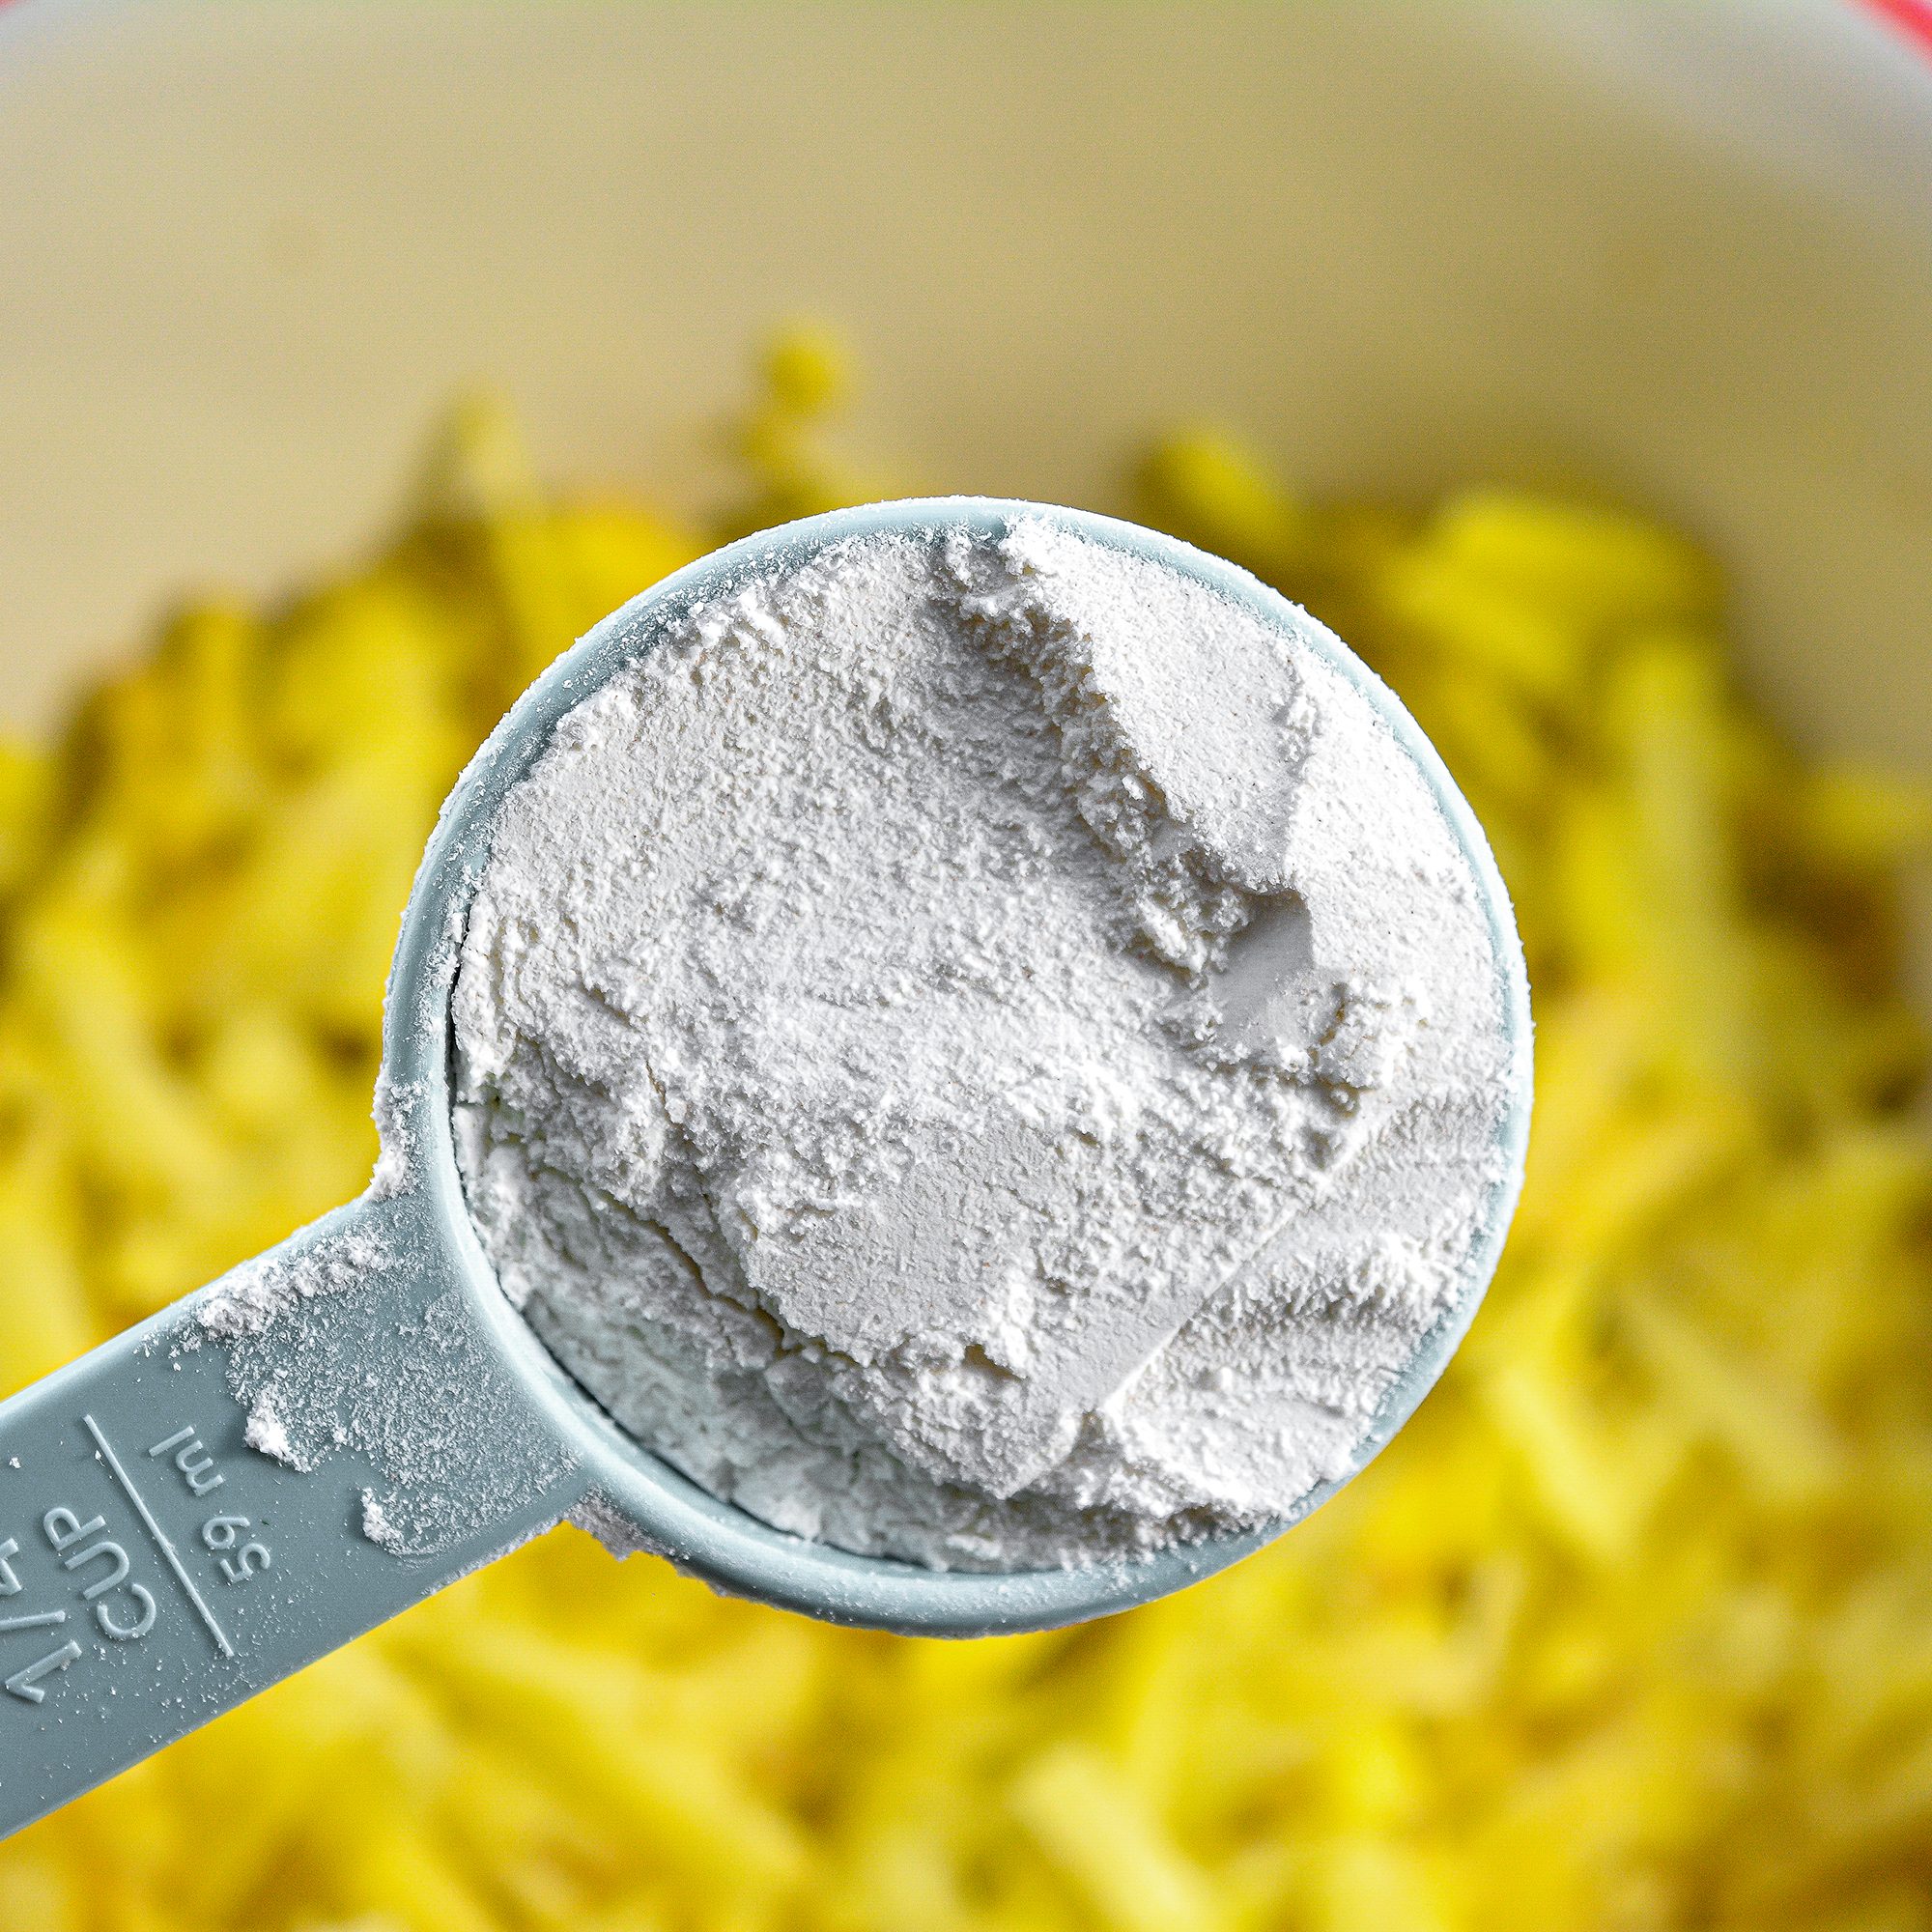 In a large mixing bowl, combine the shredded potato, 3 eggs, ½ cup flour, garlic powder, and salt and pepper to taste.